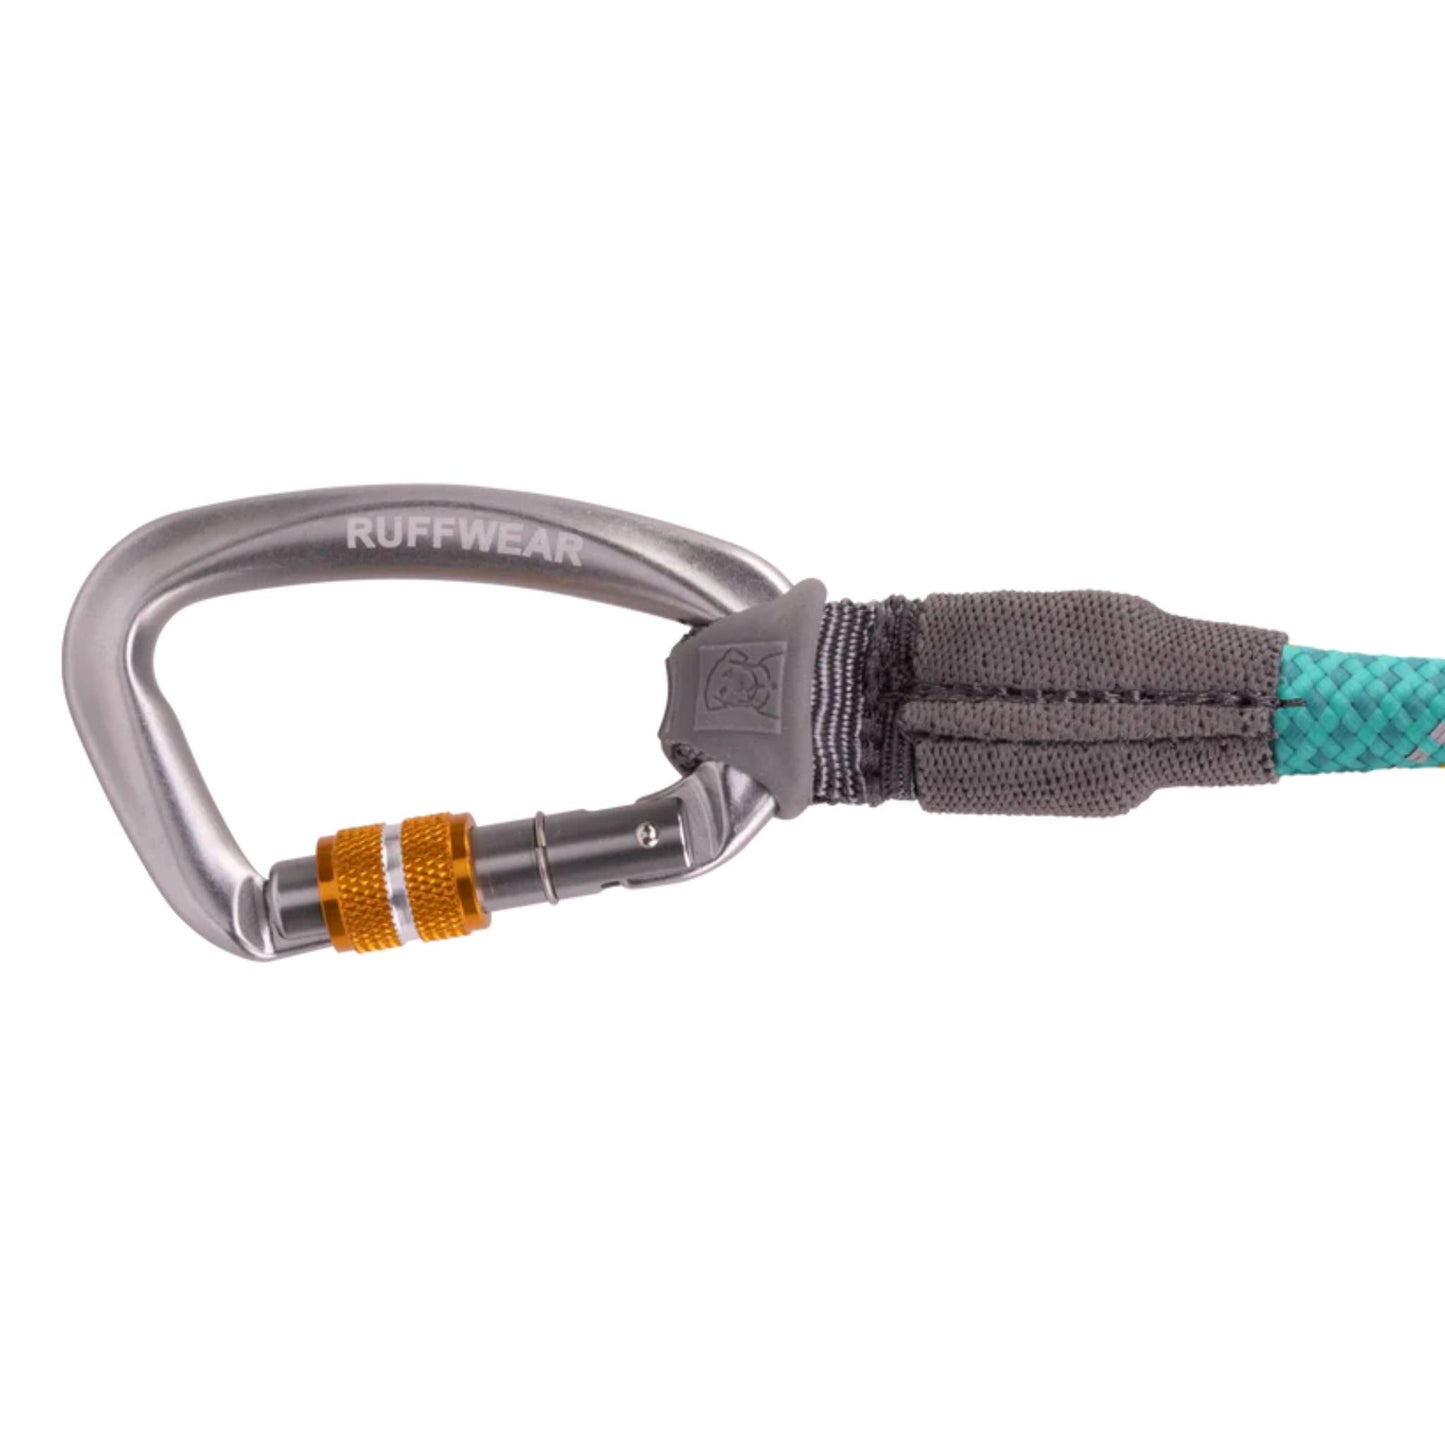 Ruffwear Knot a Long rope dog lead teal clasp